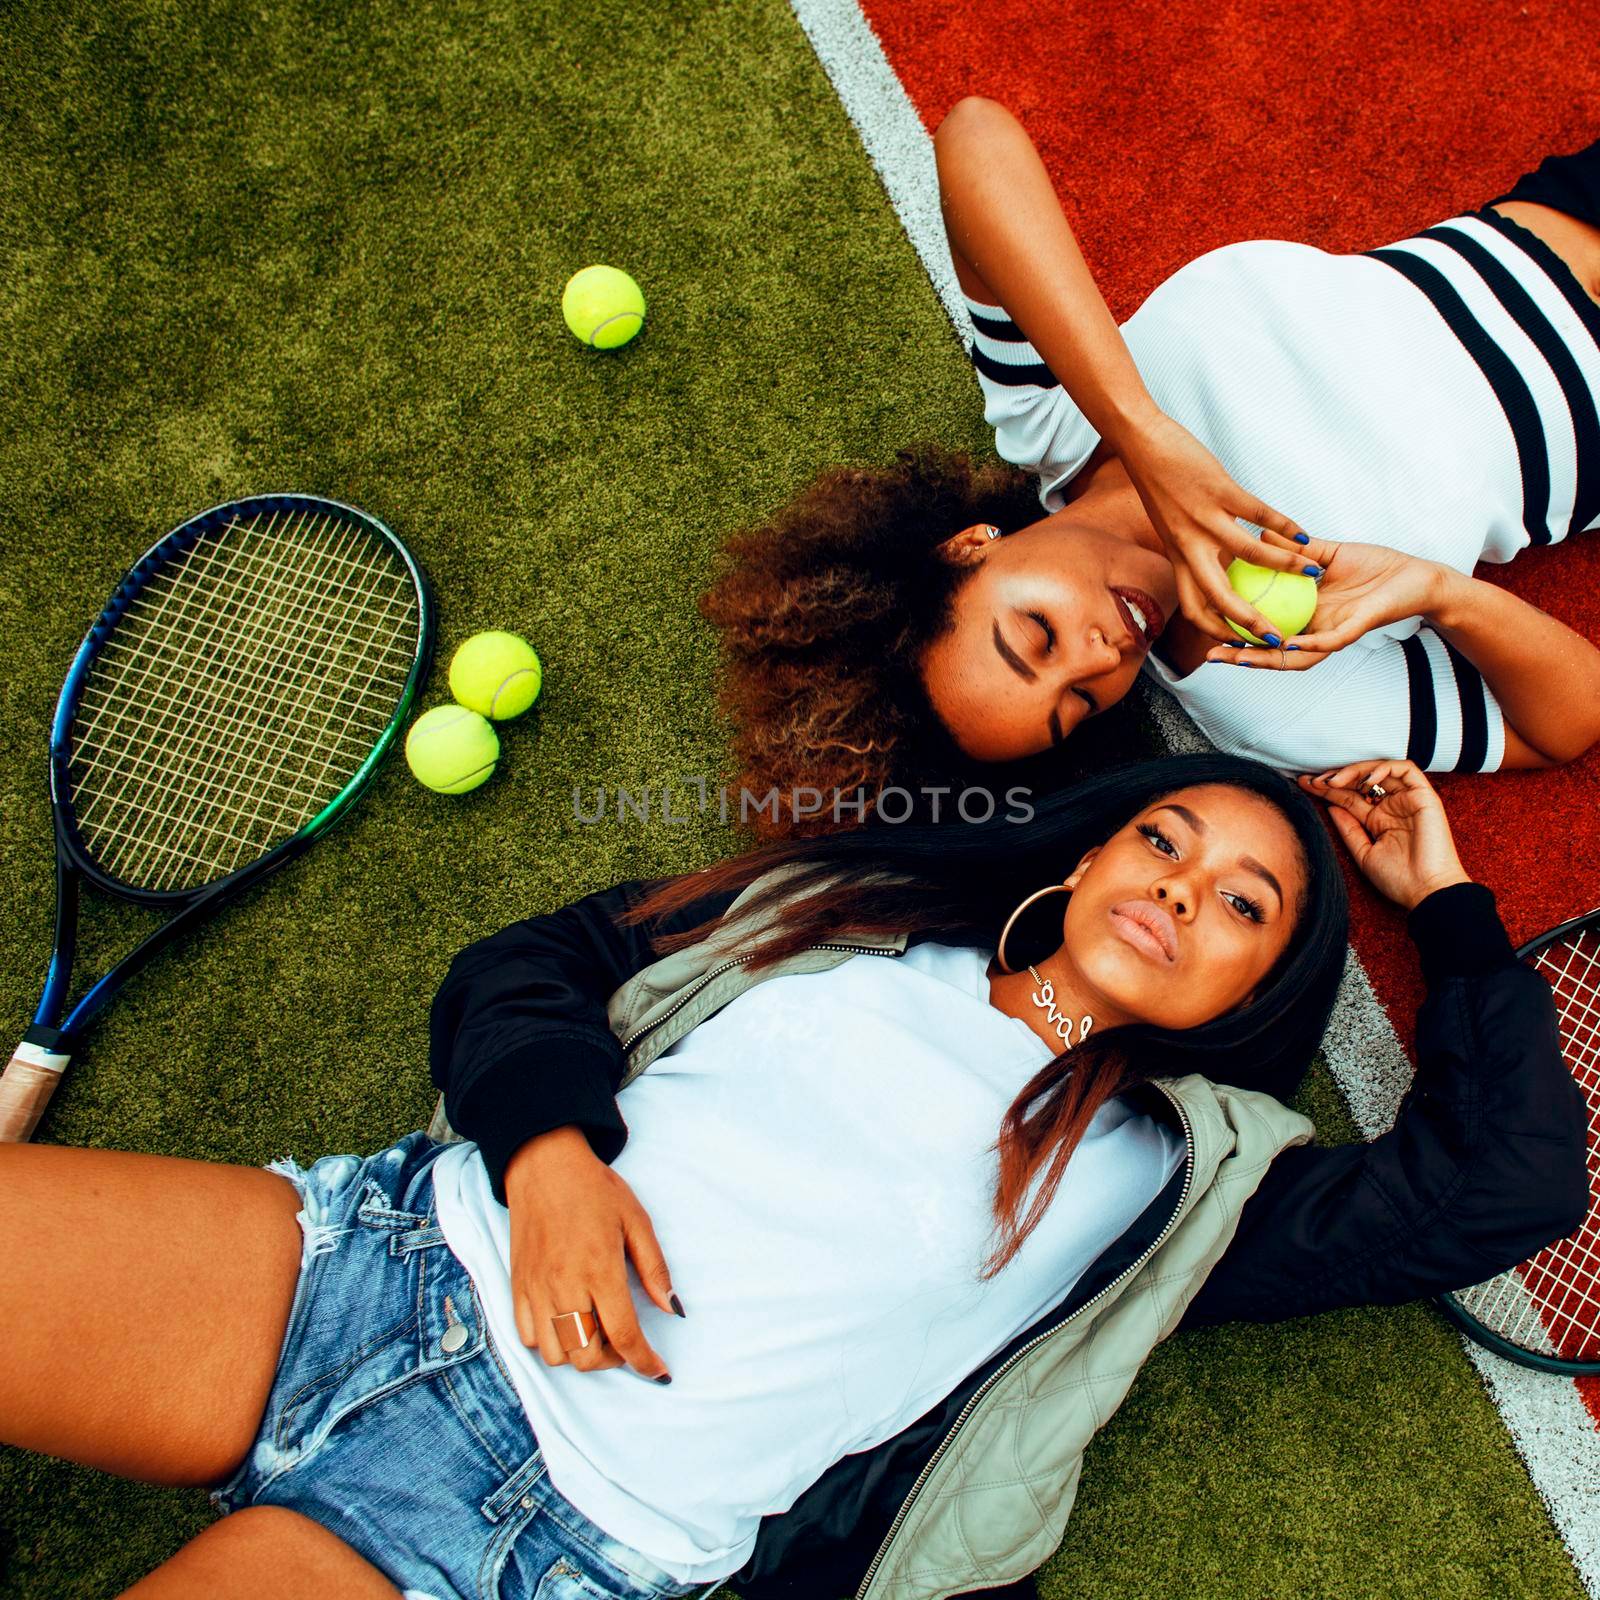 young pretty girlfriends hanging on tennis court, fashion stylish dressed swag, best friends happy smiling together lifestyle by JordanJ